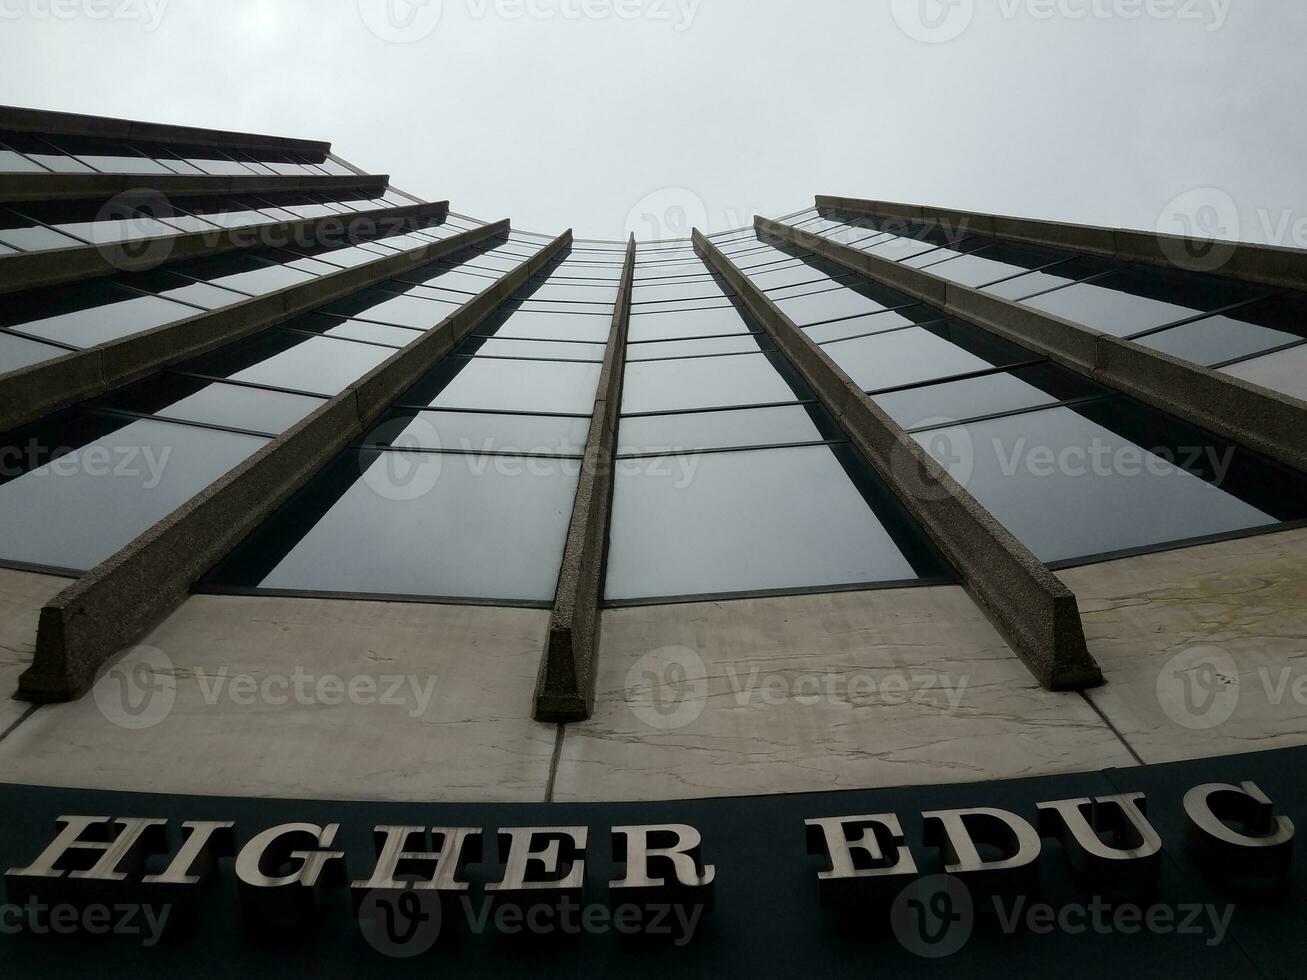 looking up at tall higher education building skyscraper photo